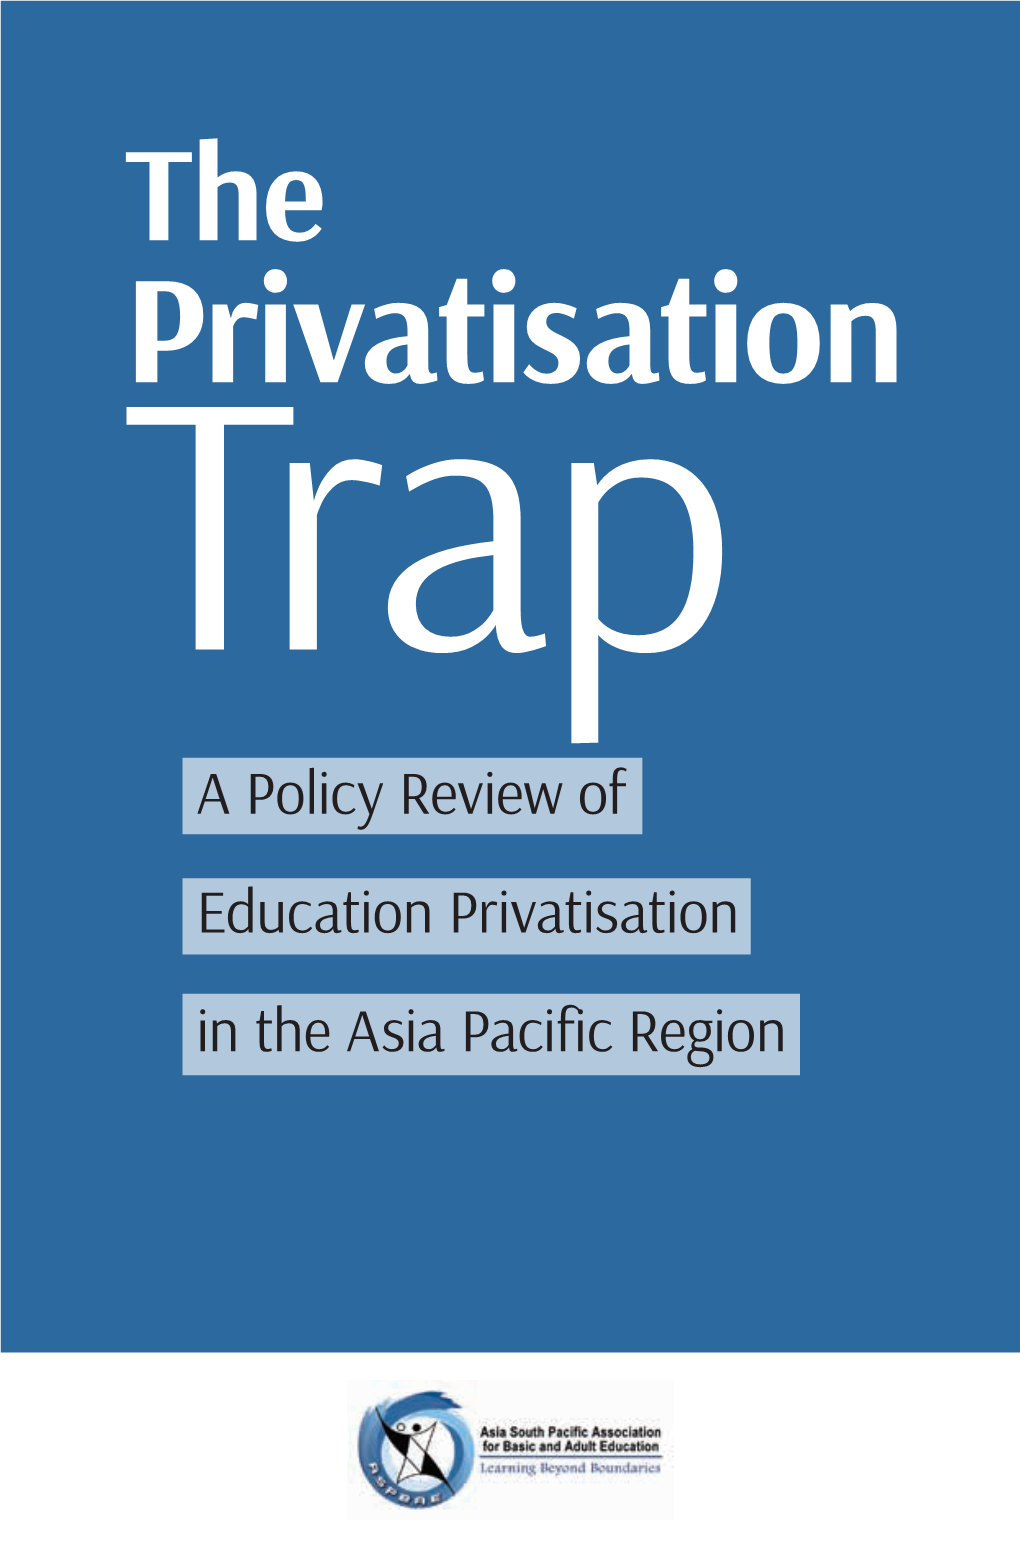 A Policy Review of Education Privatisation in the Asia Pacific